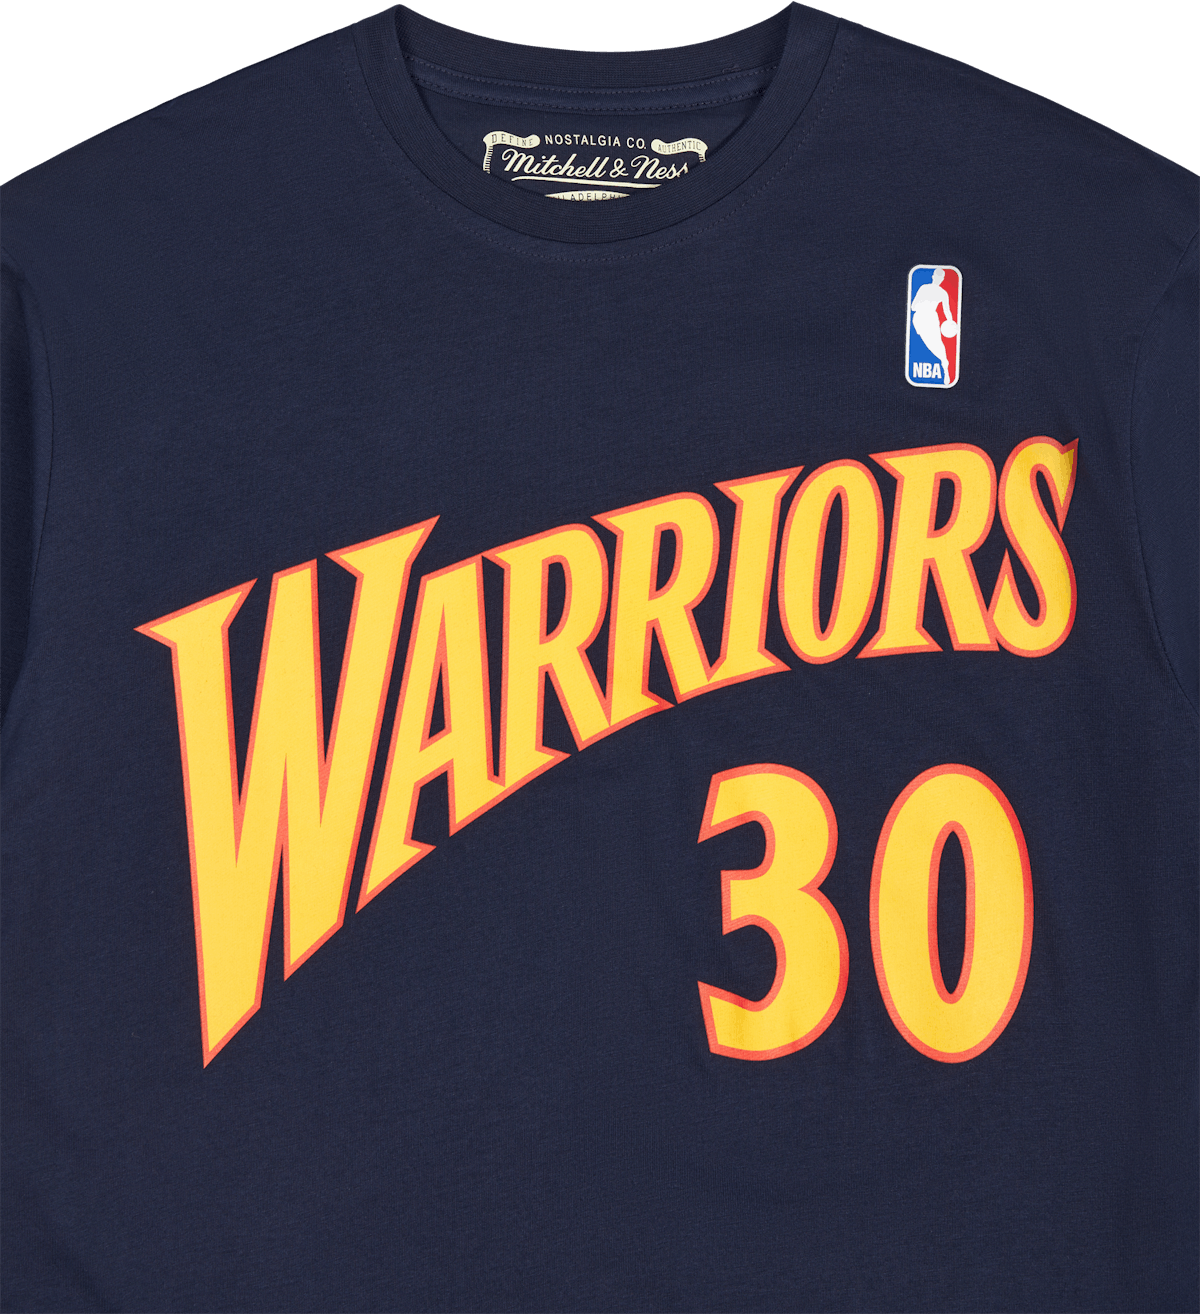 Name & Number Tee - Stephen Curry